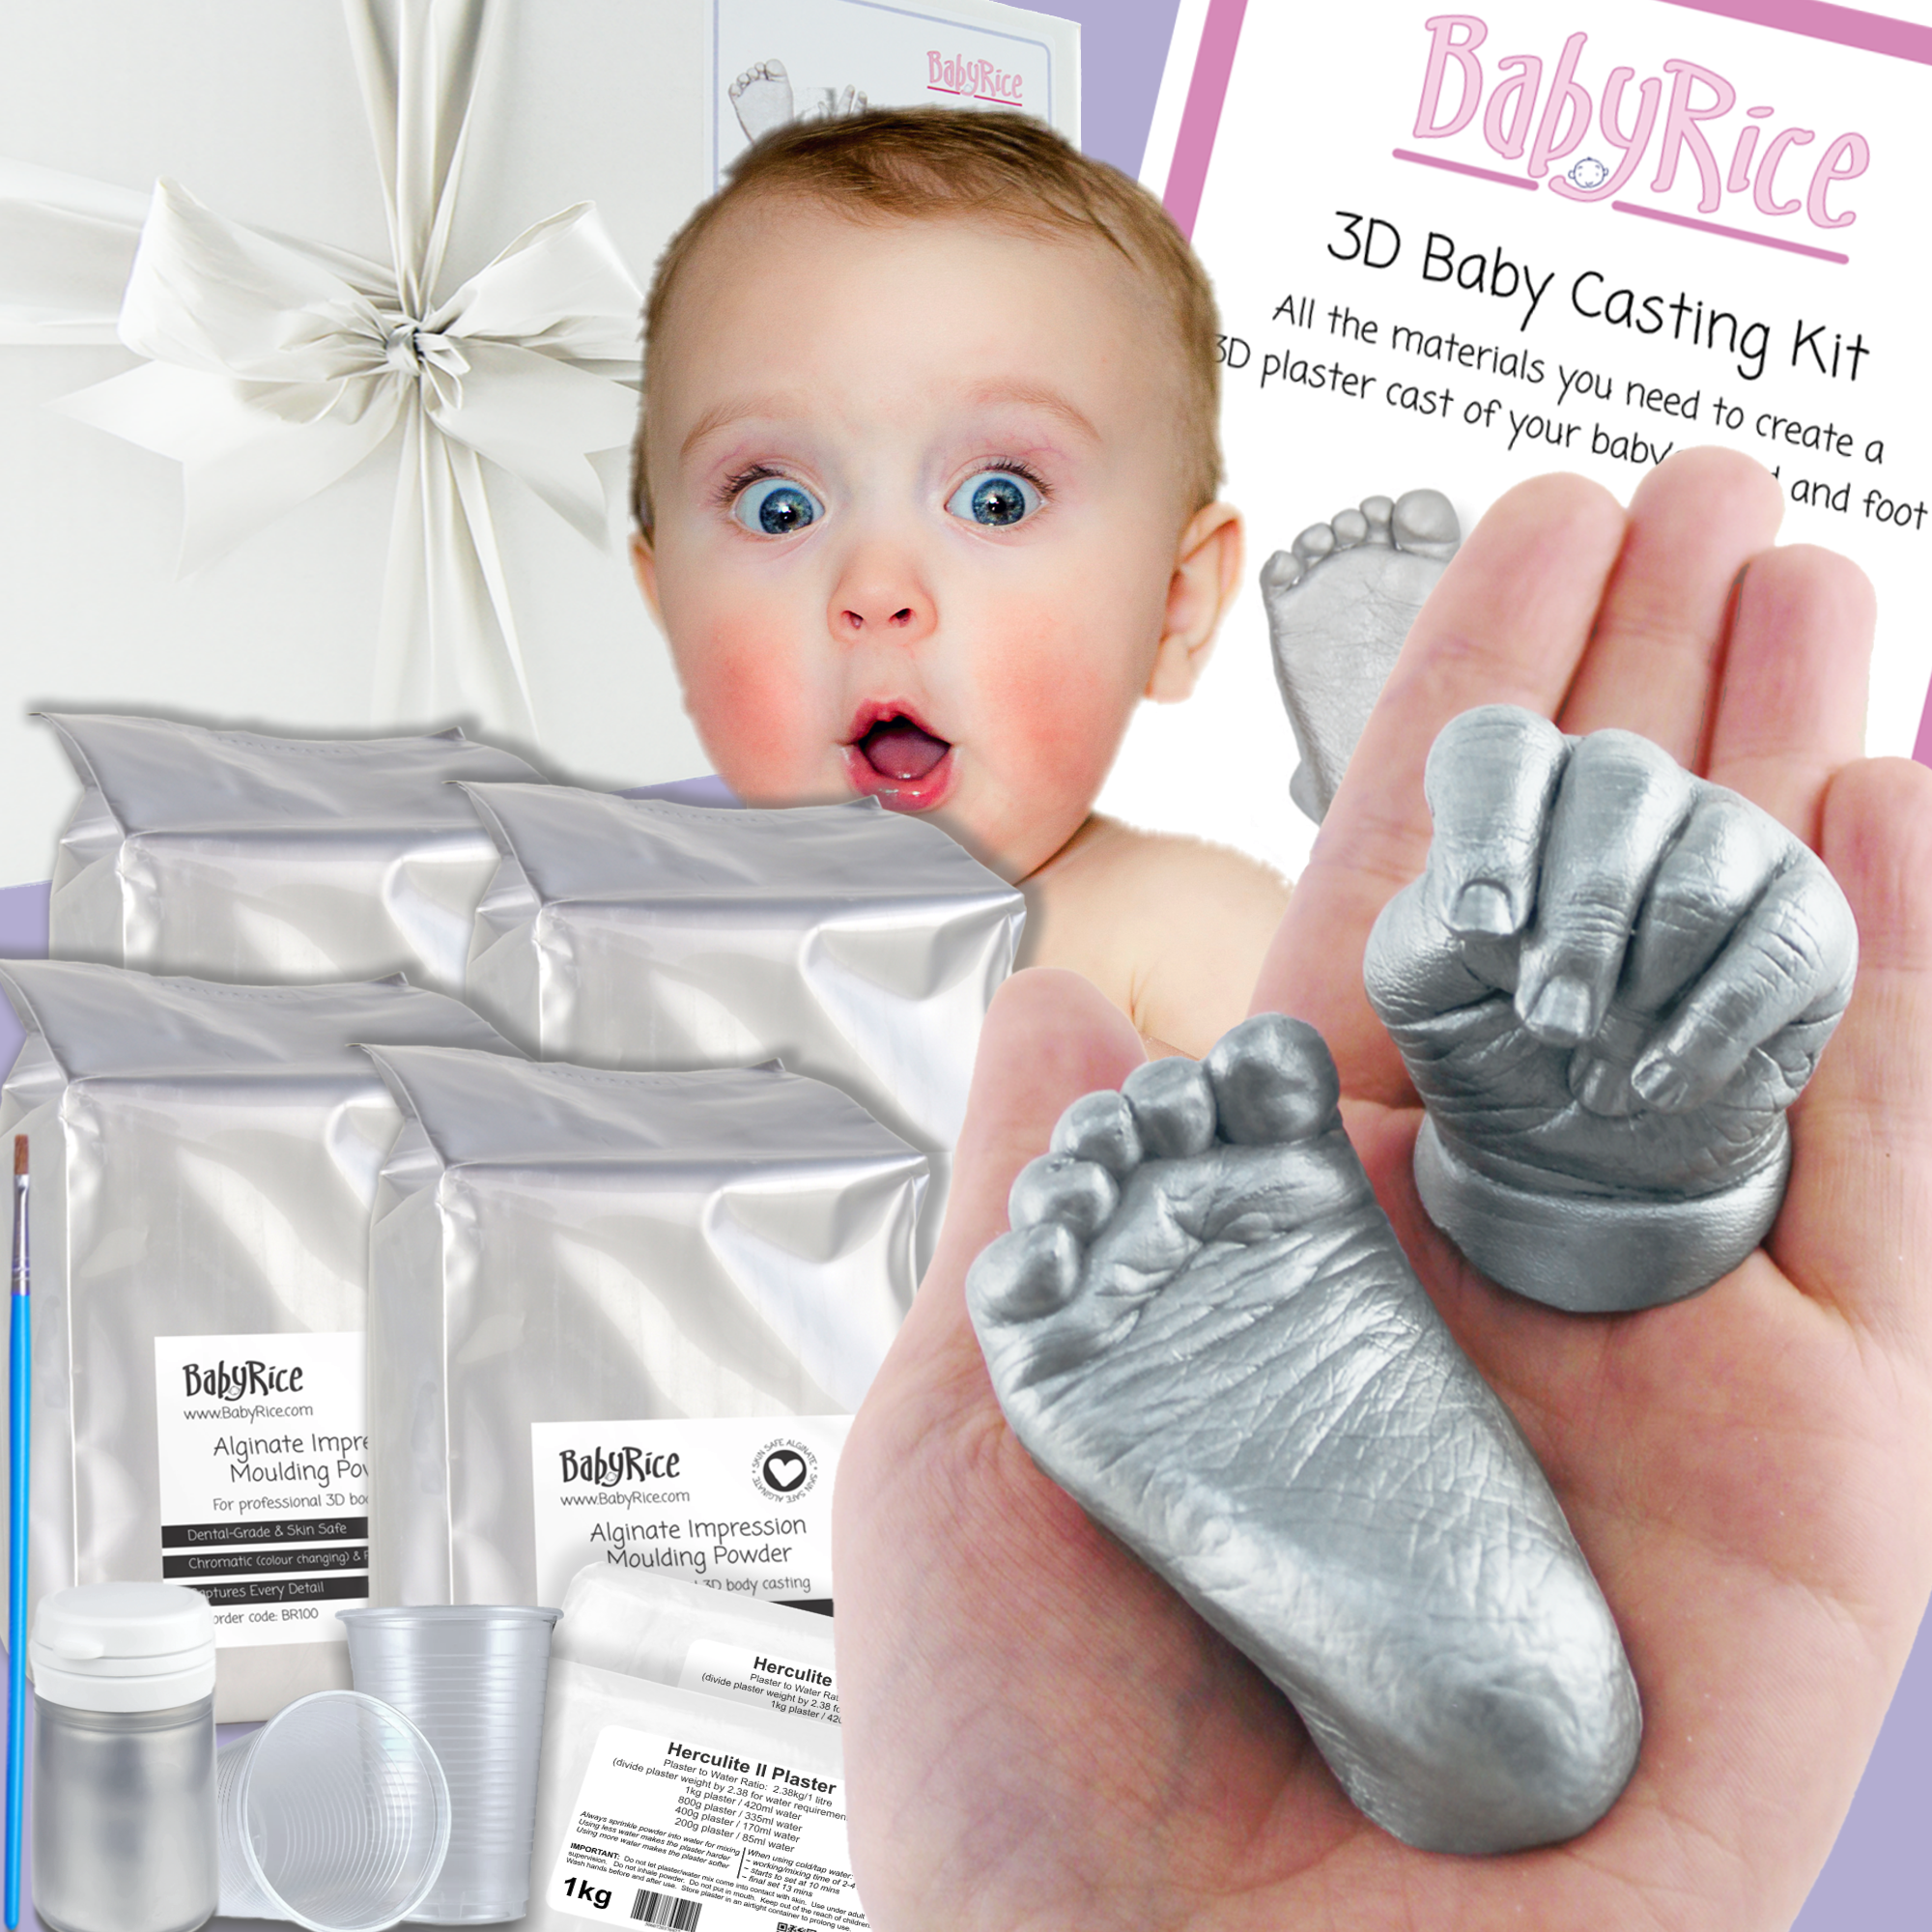 metallic silver extra large twins baby hand foot 3d casts kit set